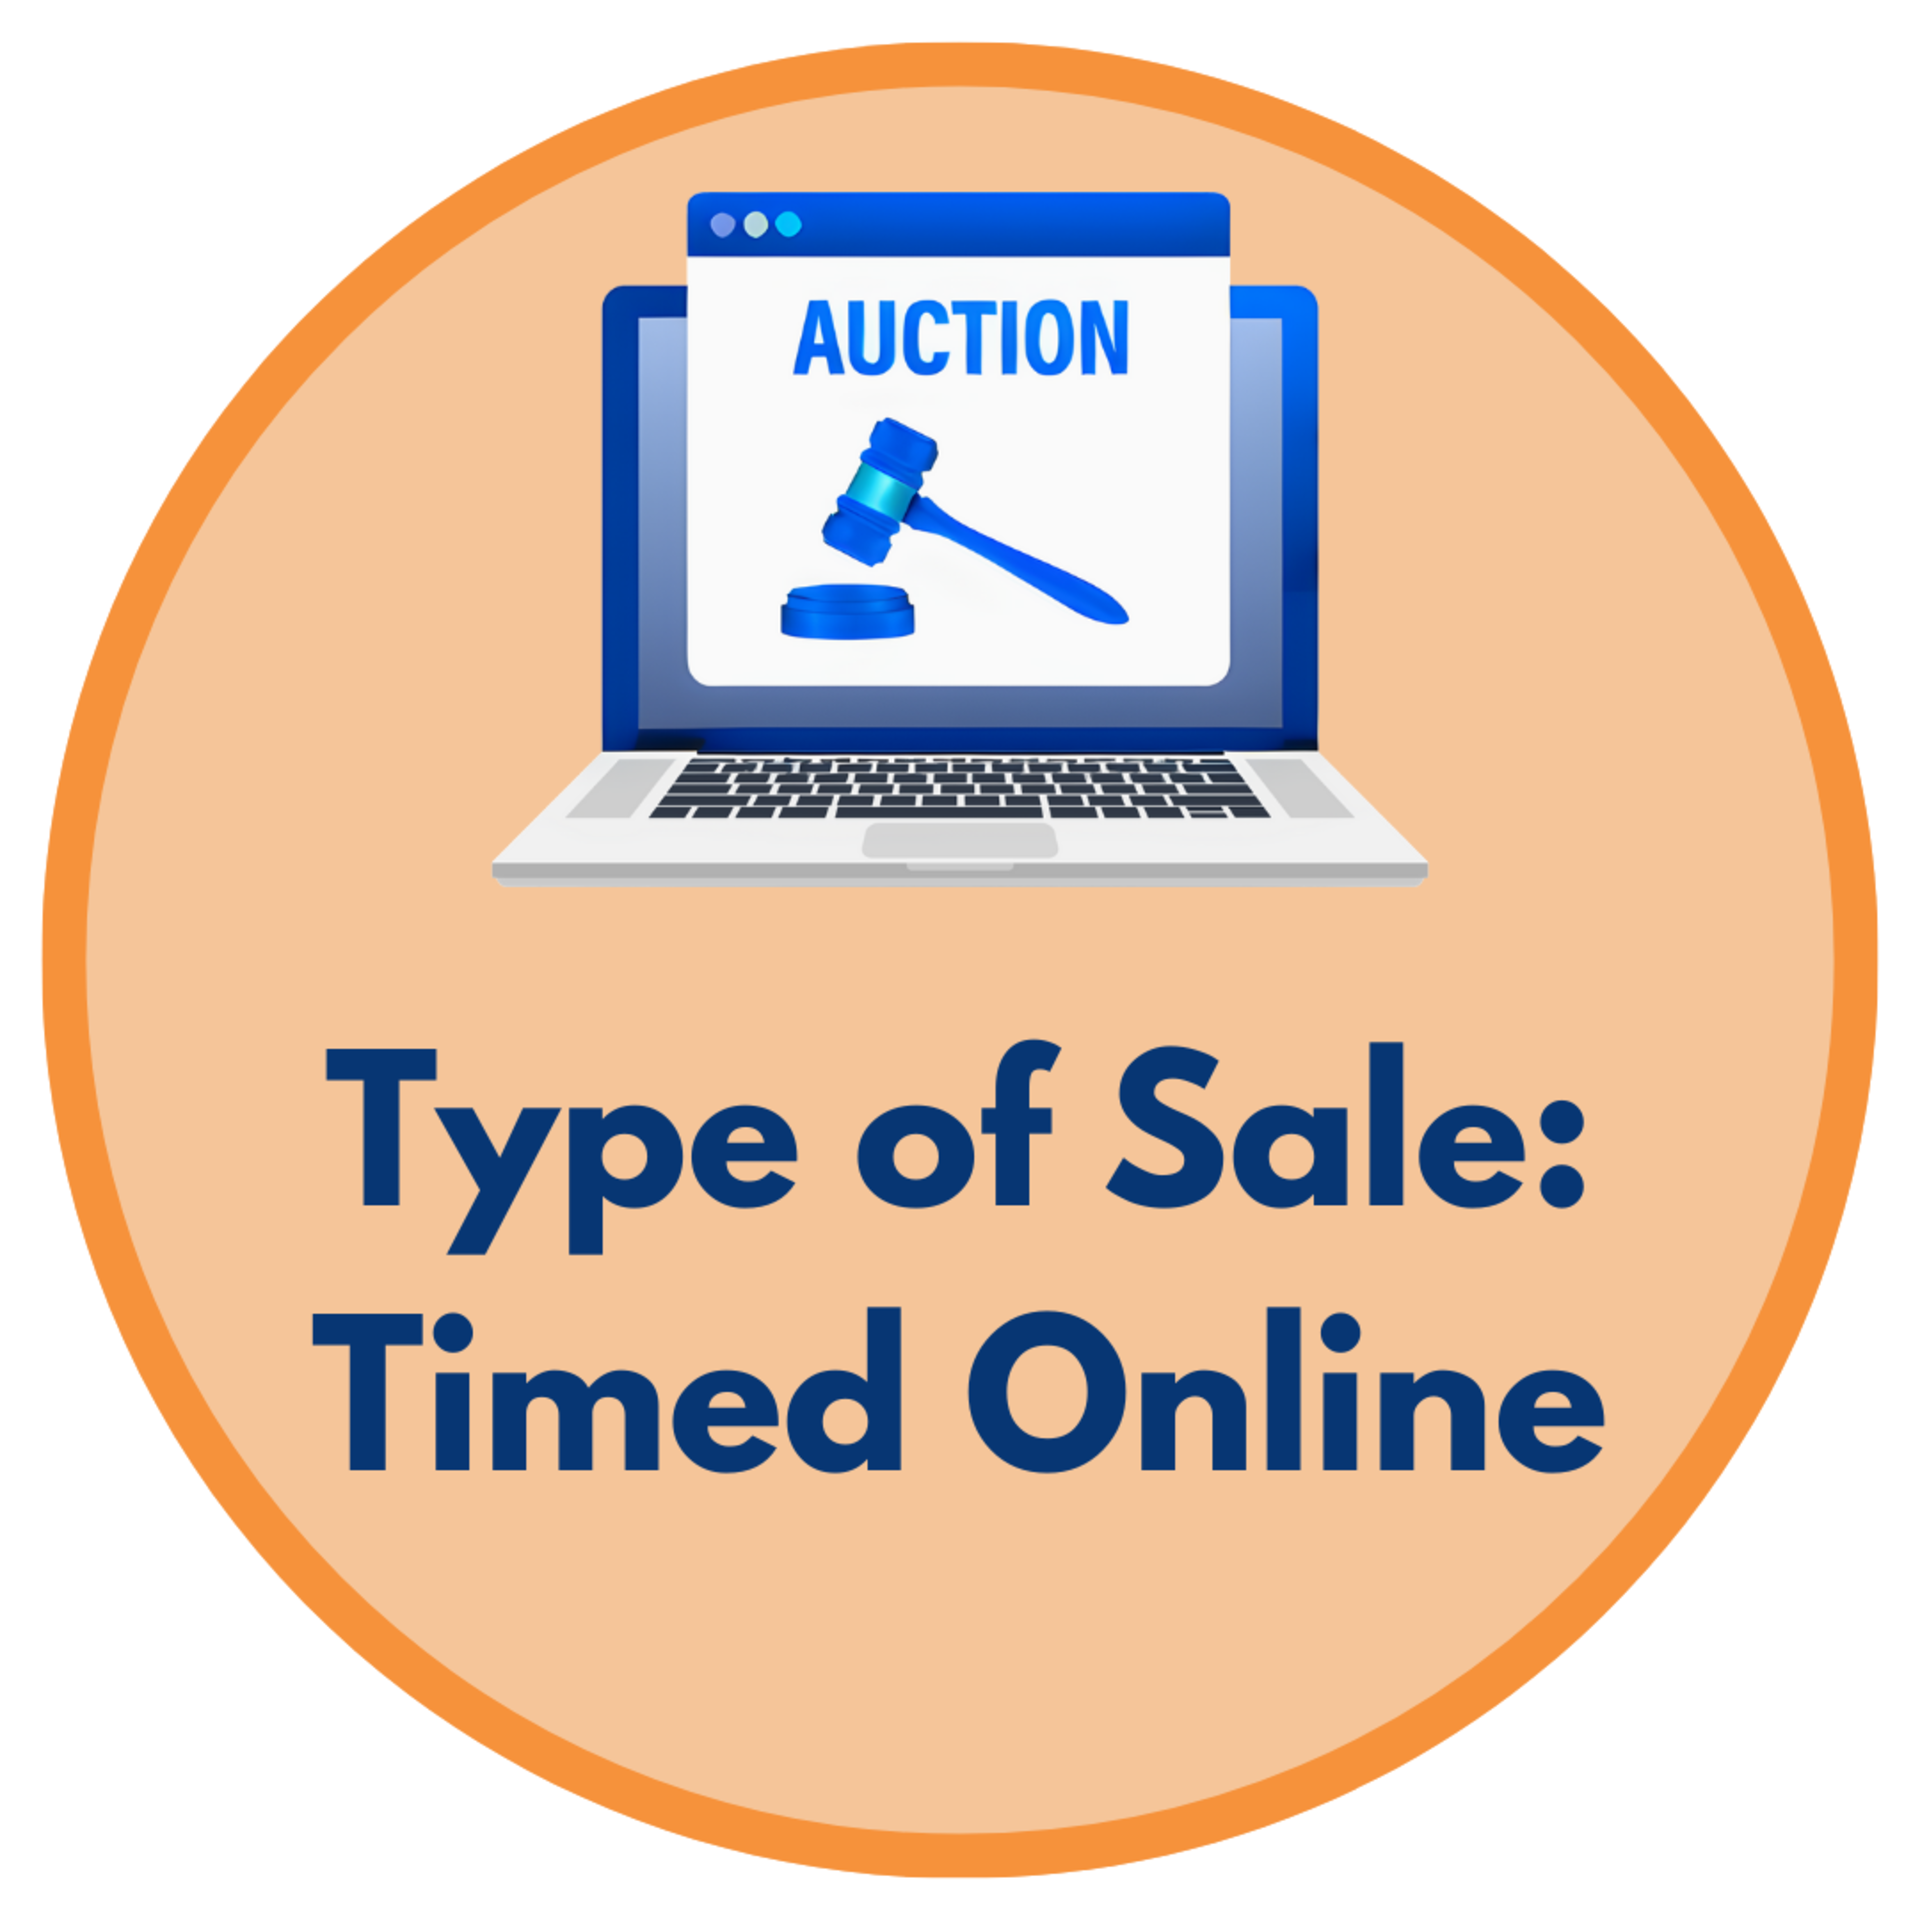 Timed Online Auction- Wednesday, May 22 at 10:00 AM